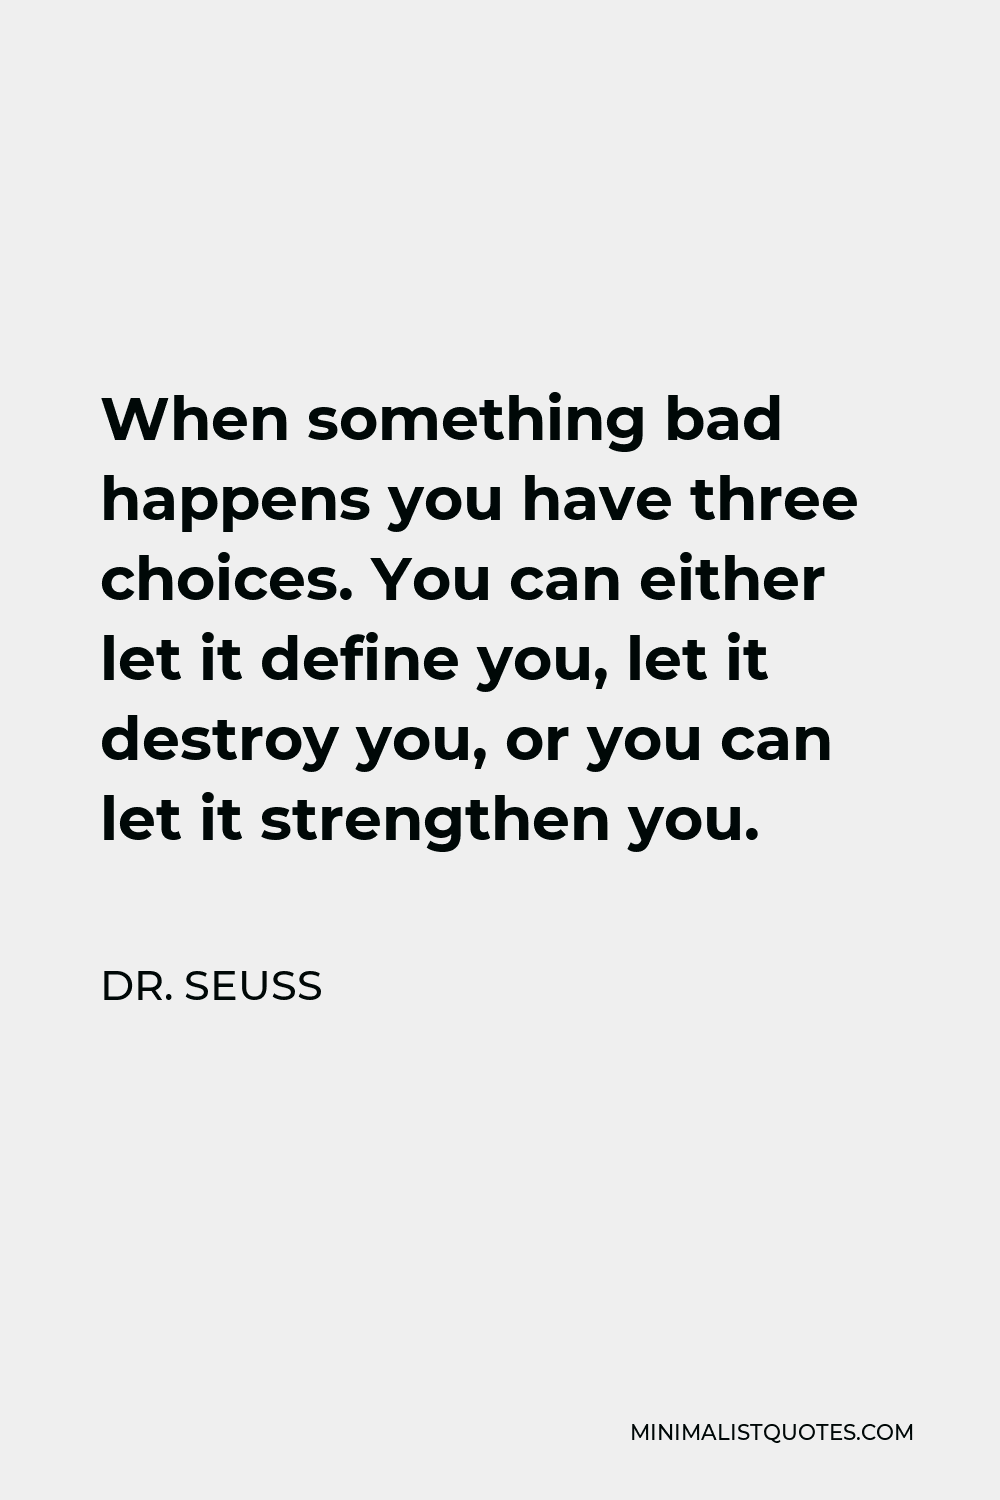 Dr. Seuss Quote - When something bad happens you have three choices. You can either let it define you, let it destroy you, or you can let it strengthen you.